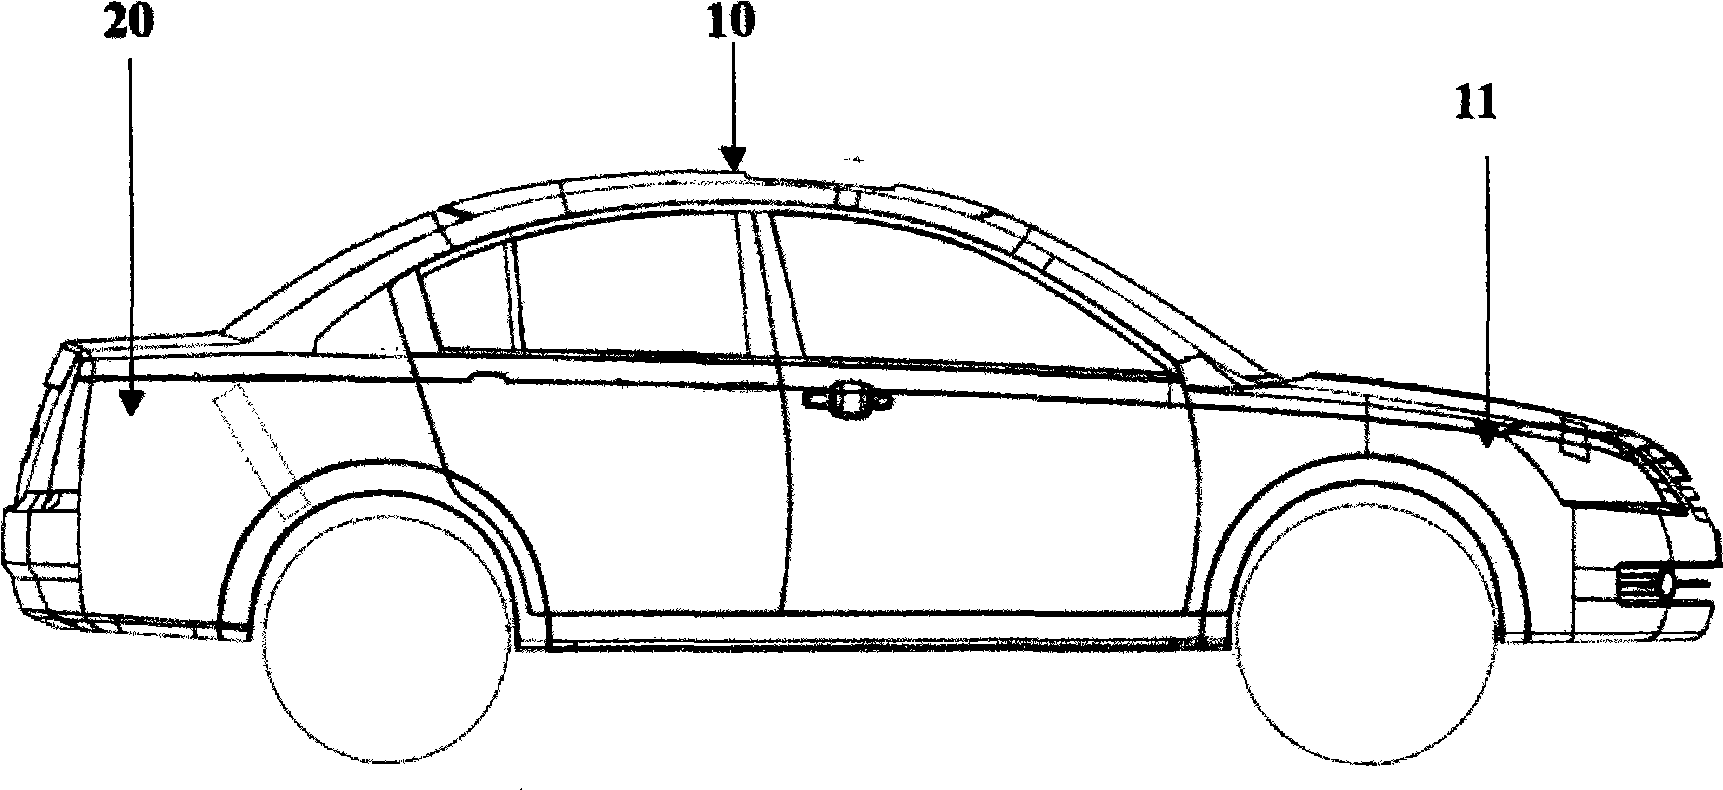 Installation structure of battery/battery pack for electric vehicle